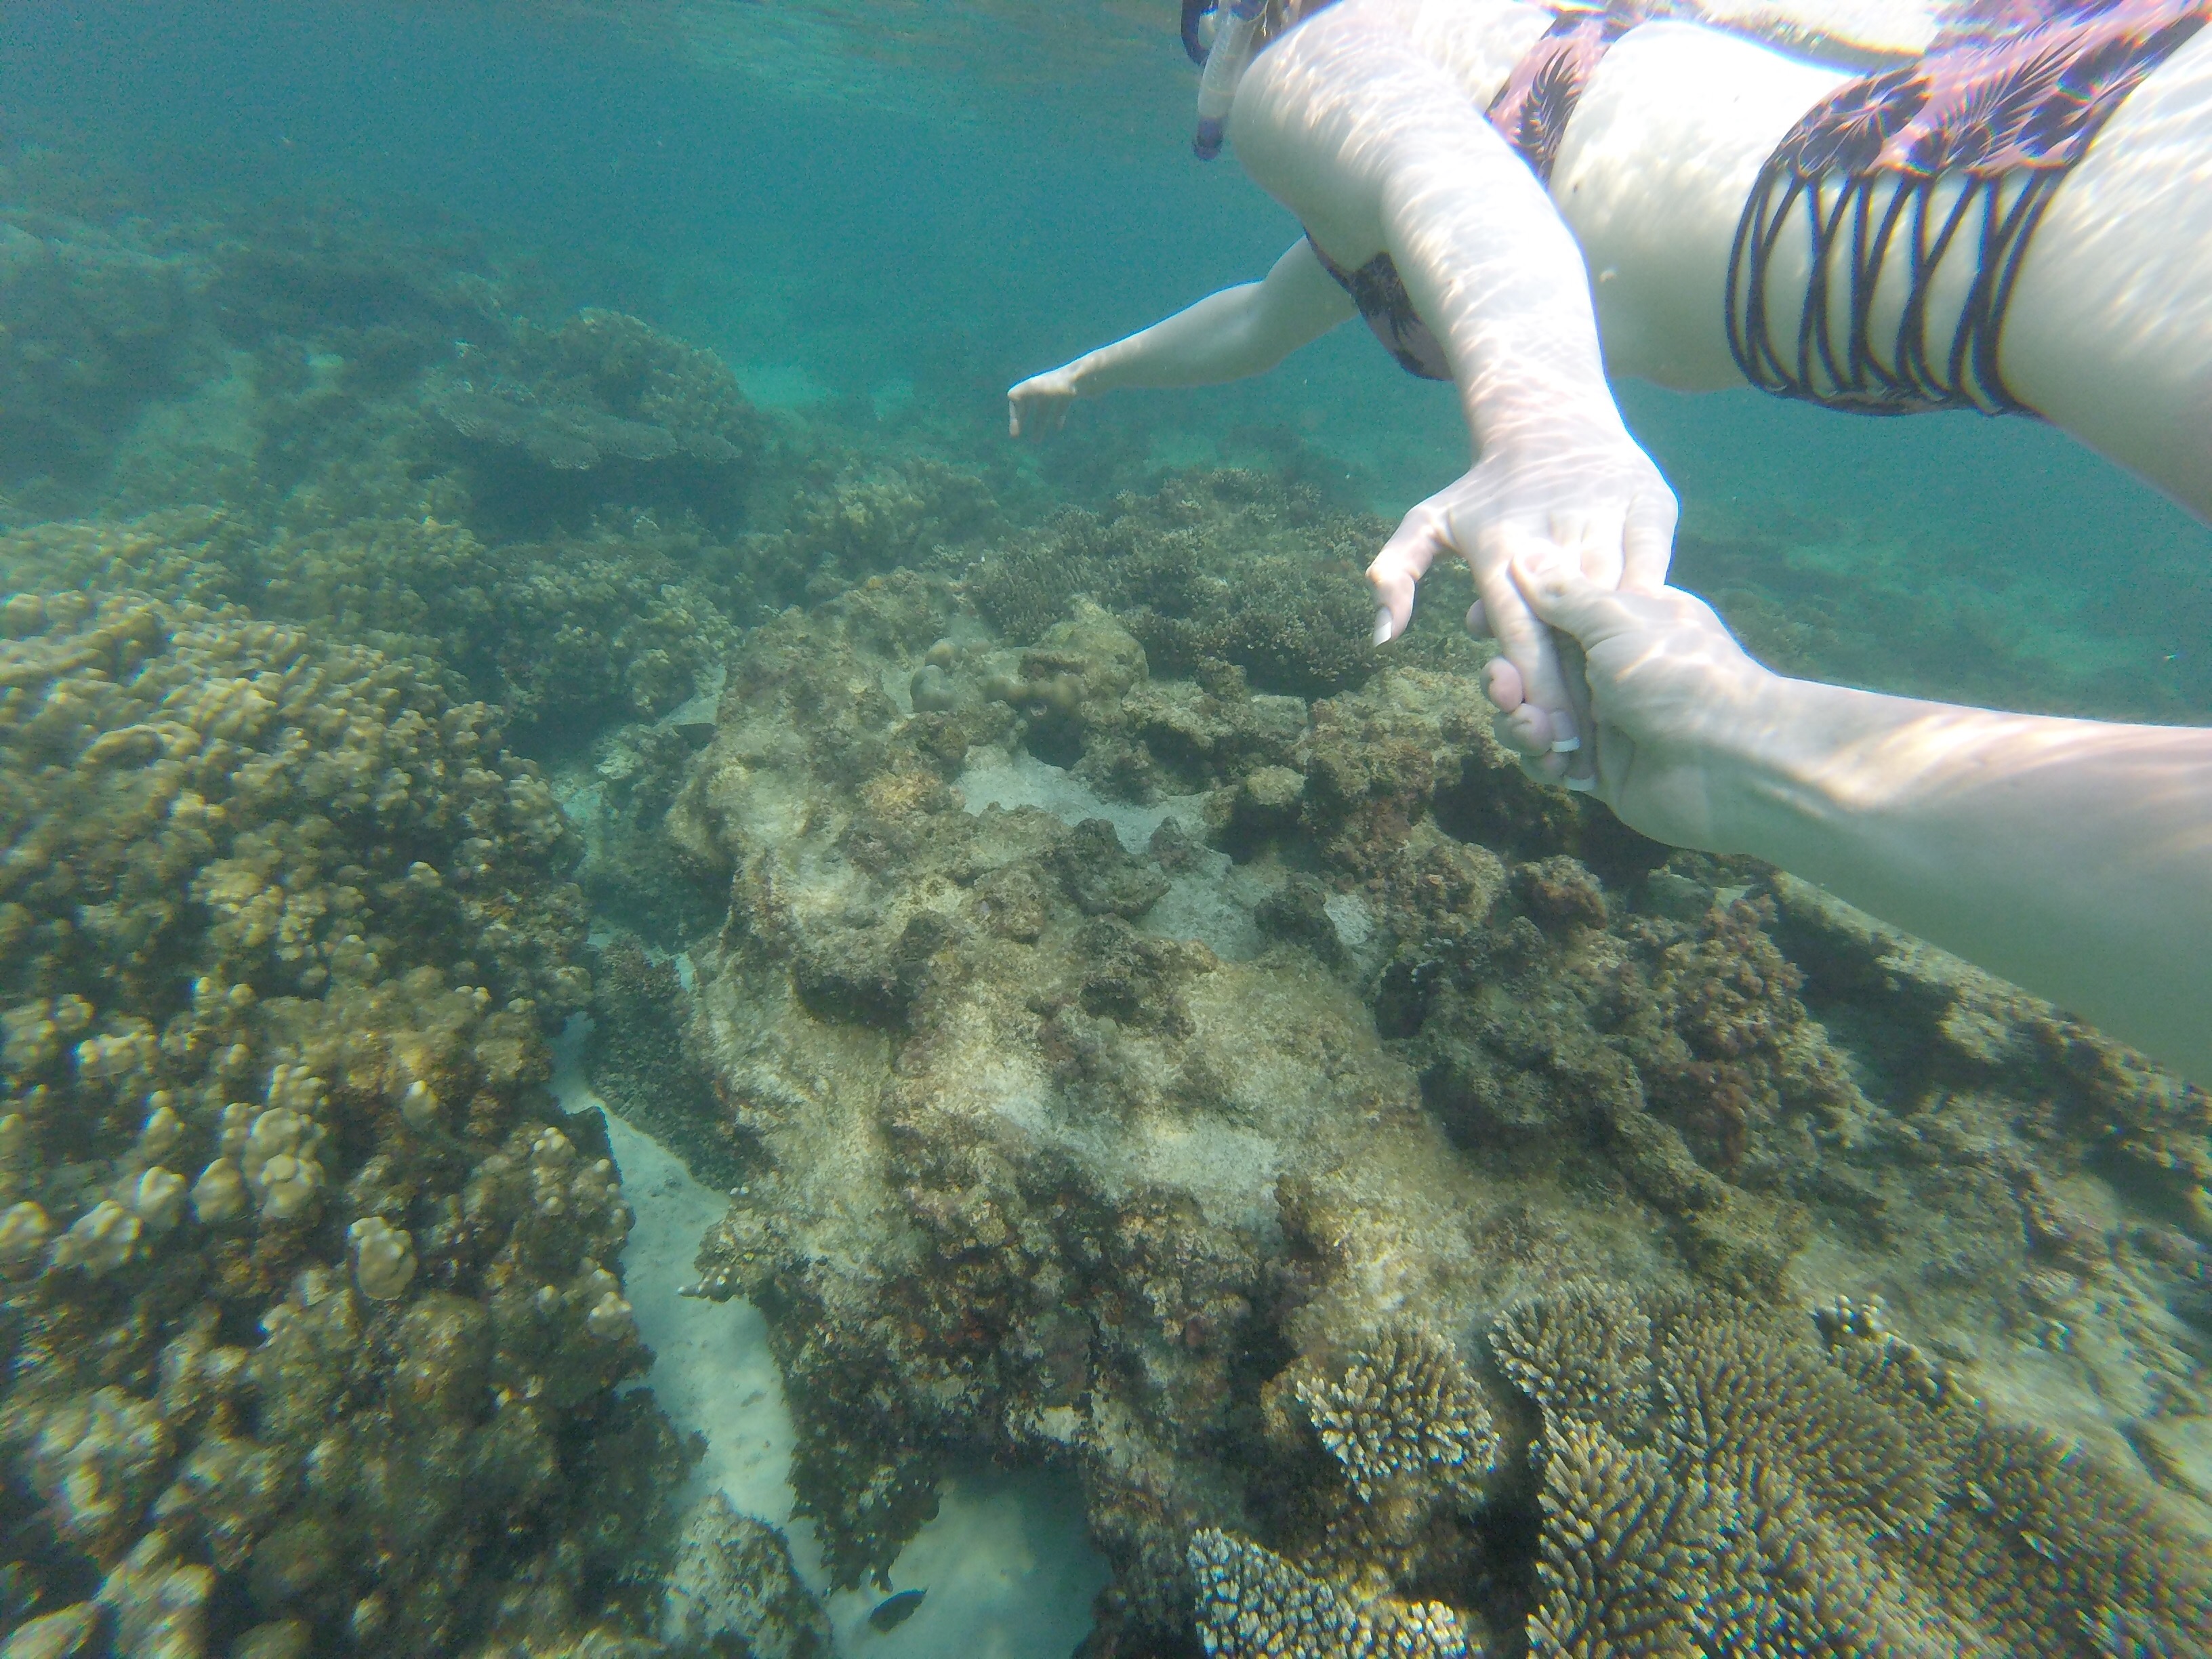 Erinn snorkeling at the An Thoi islands. 